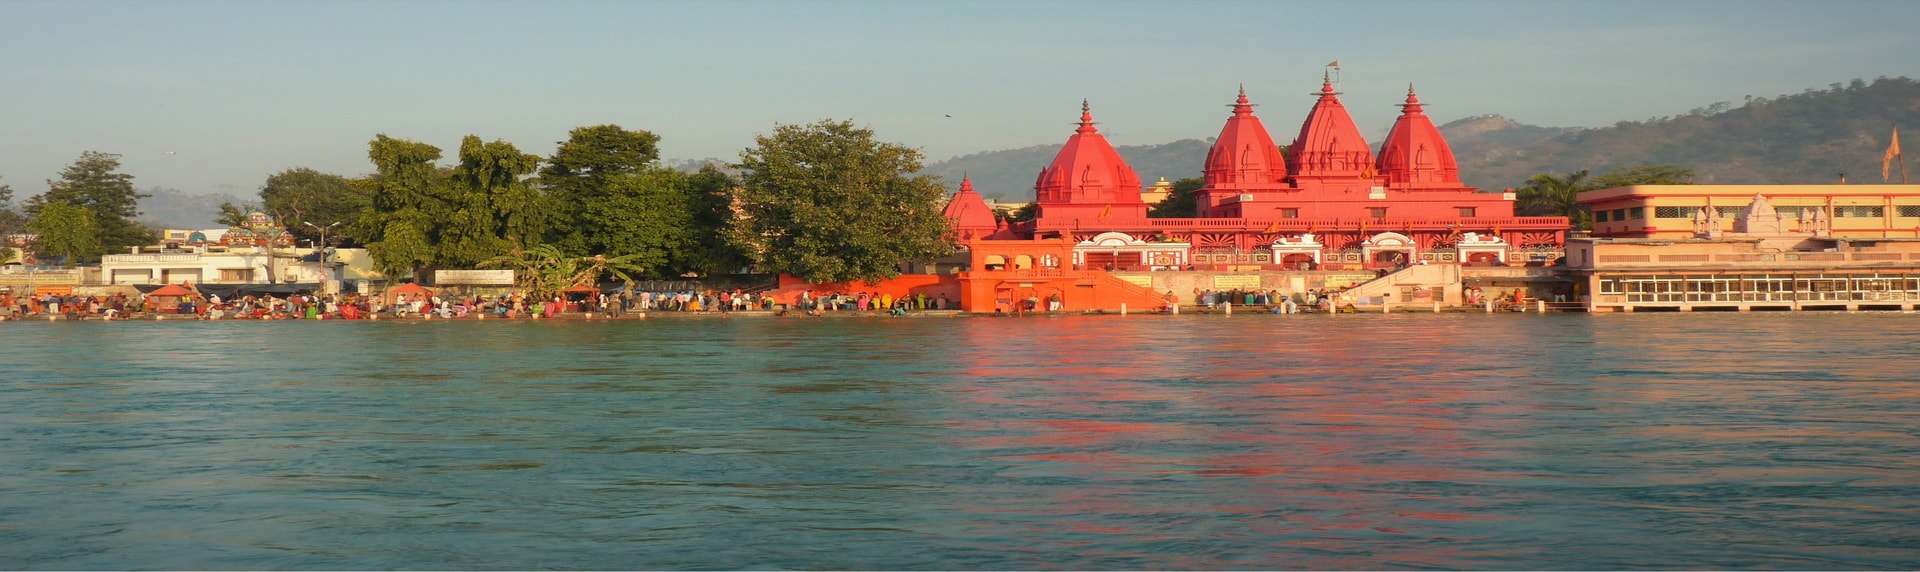 Bholanand sannyas ashram by the Ganga river is one of the places to visit in Haridwar